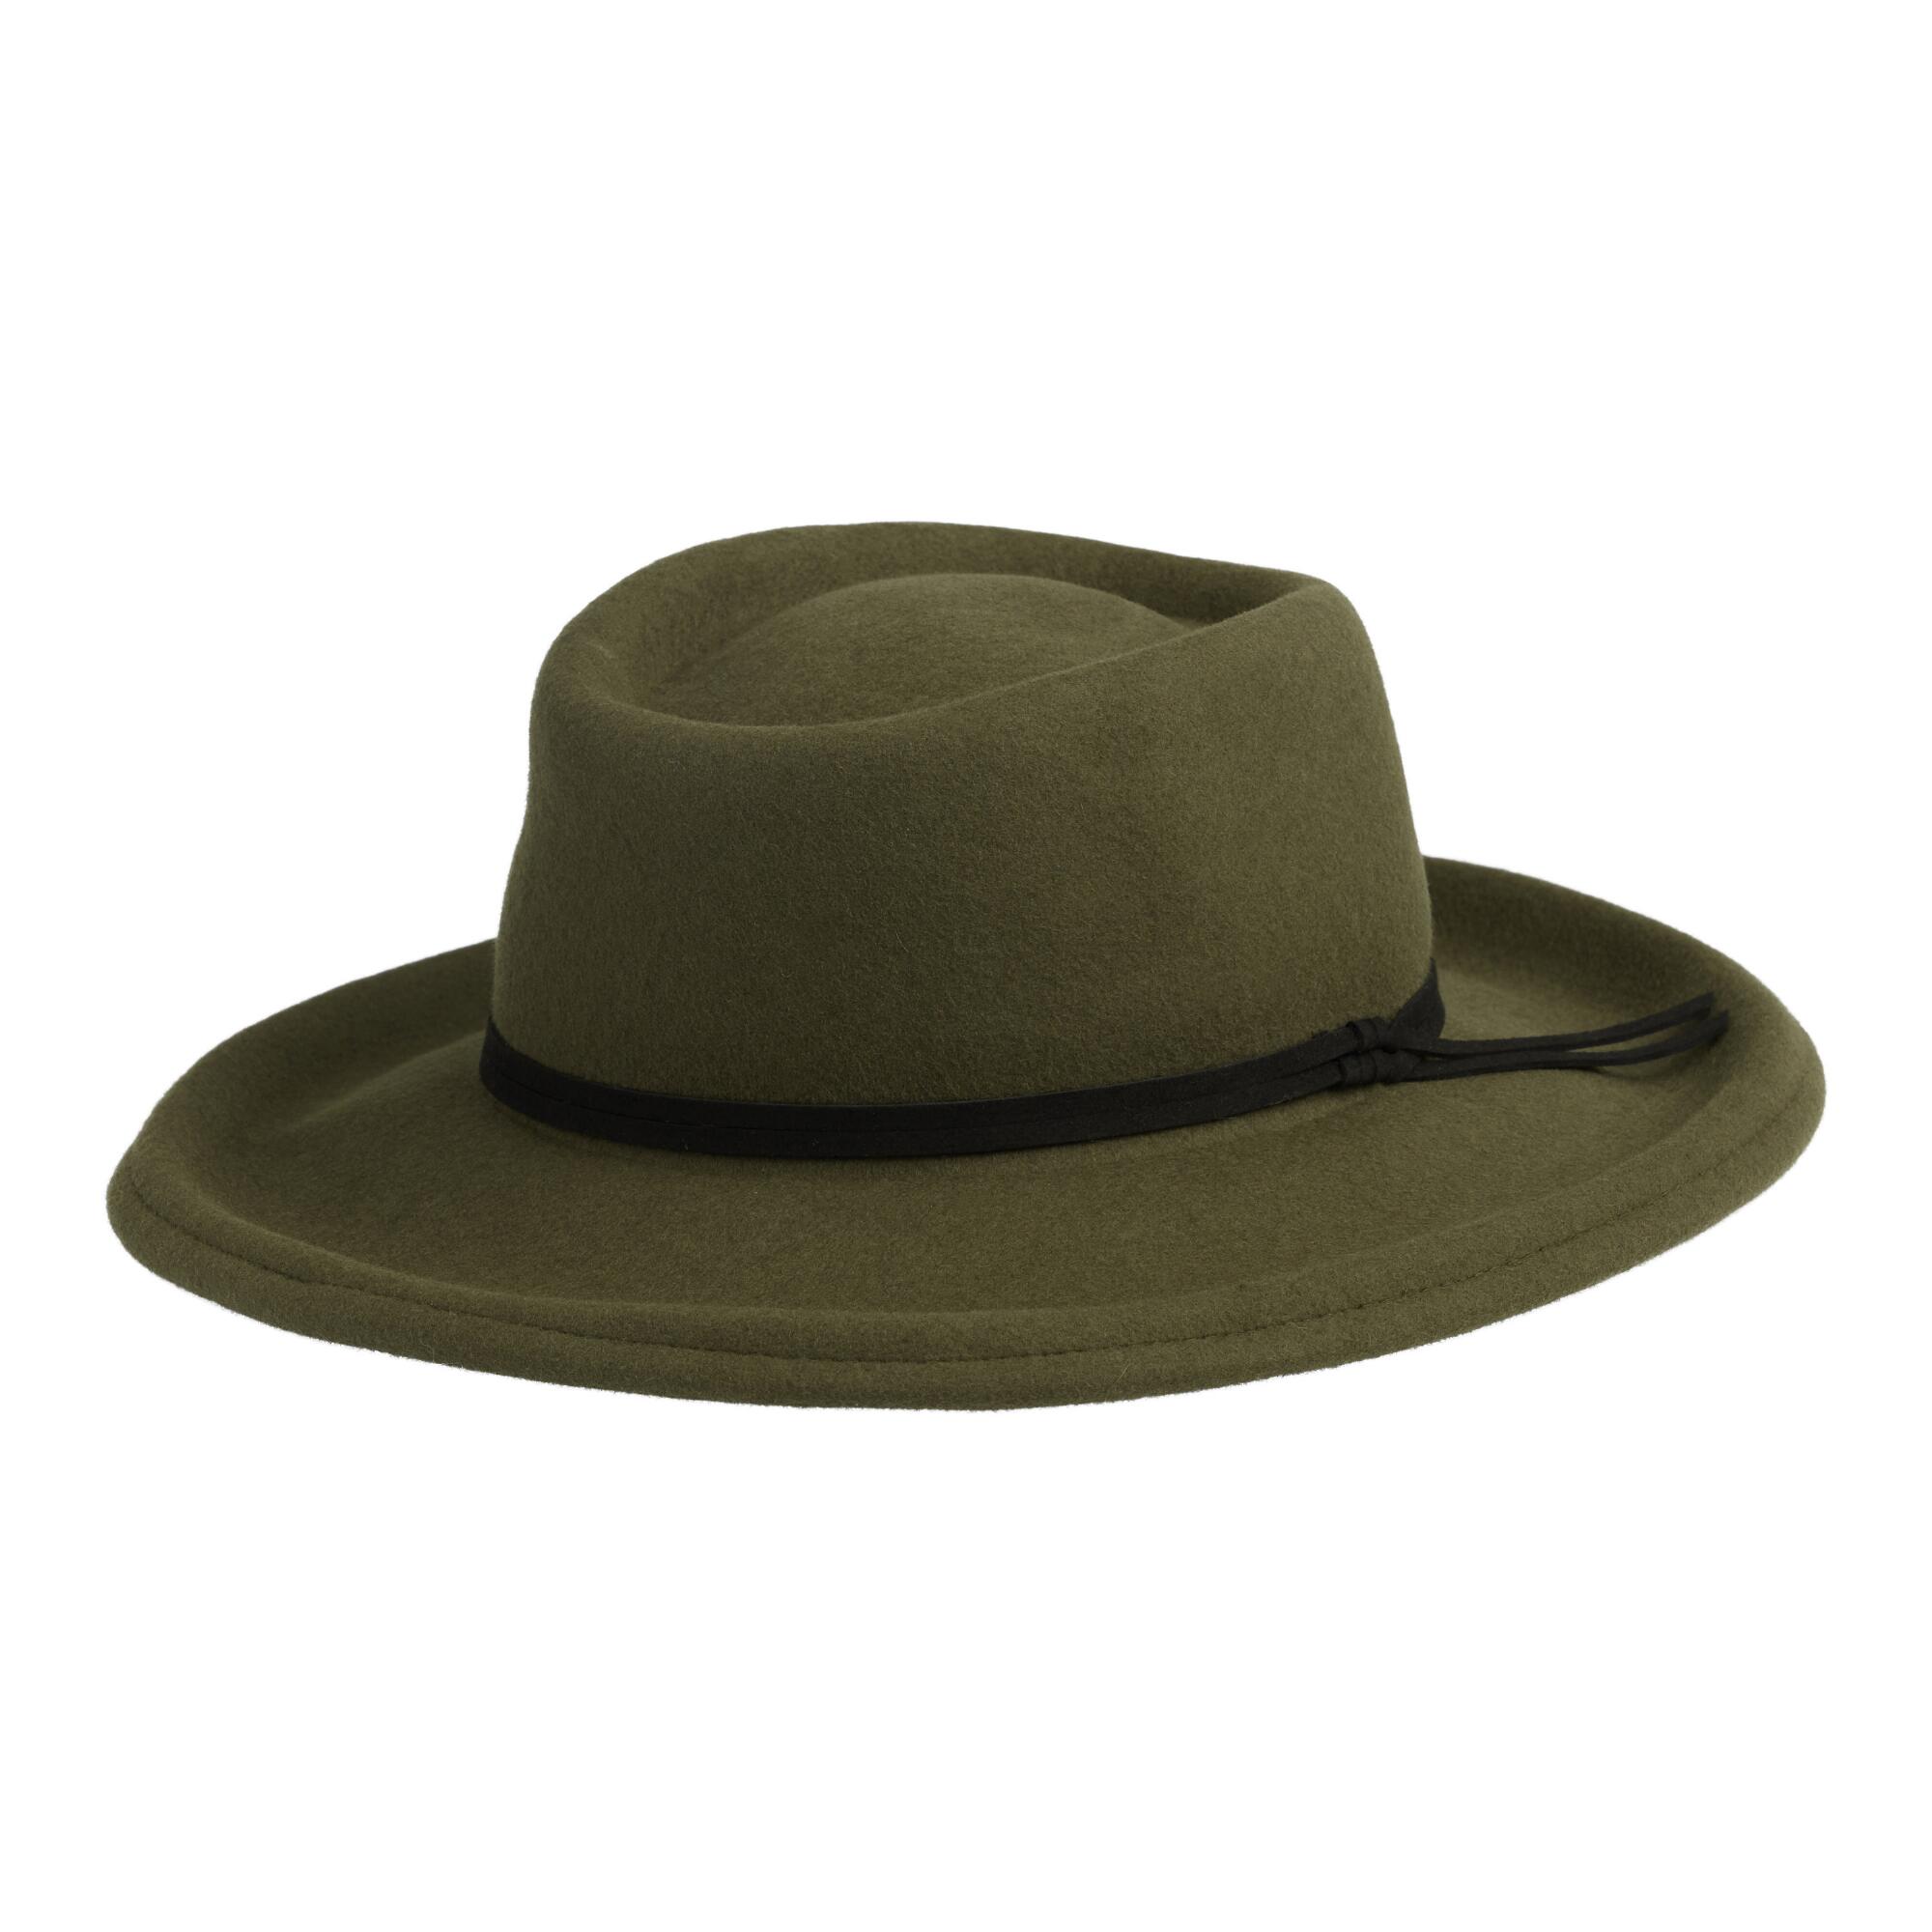 Olive Green Wool Flat Top Hat by World Market